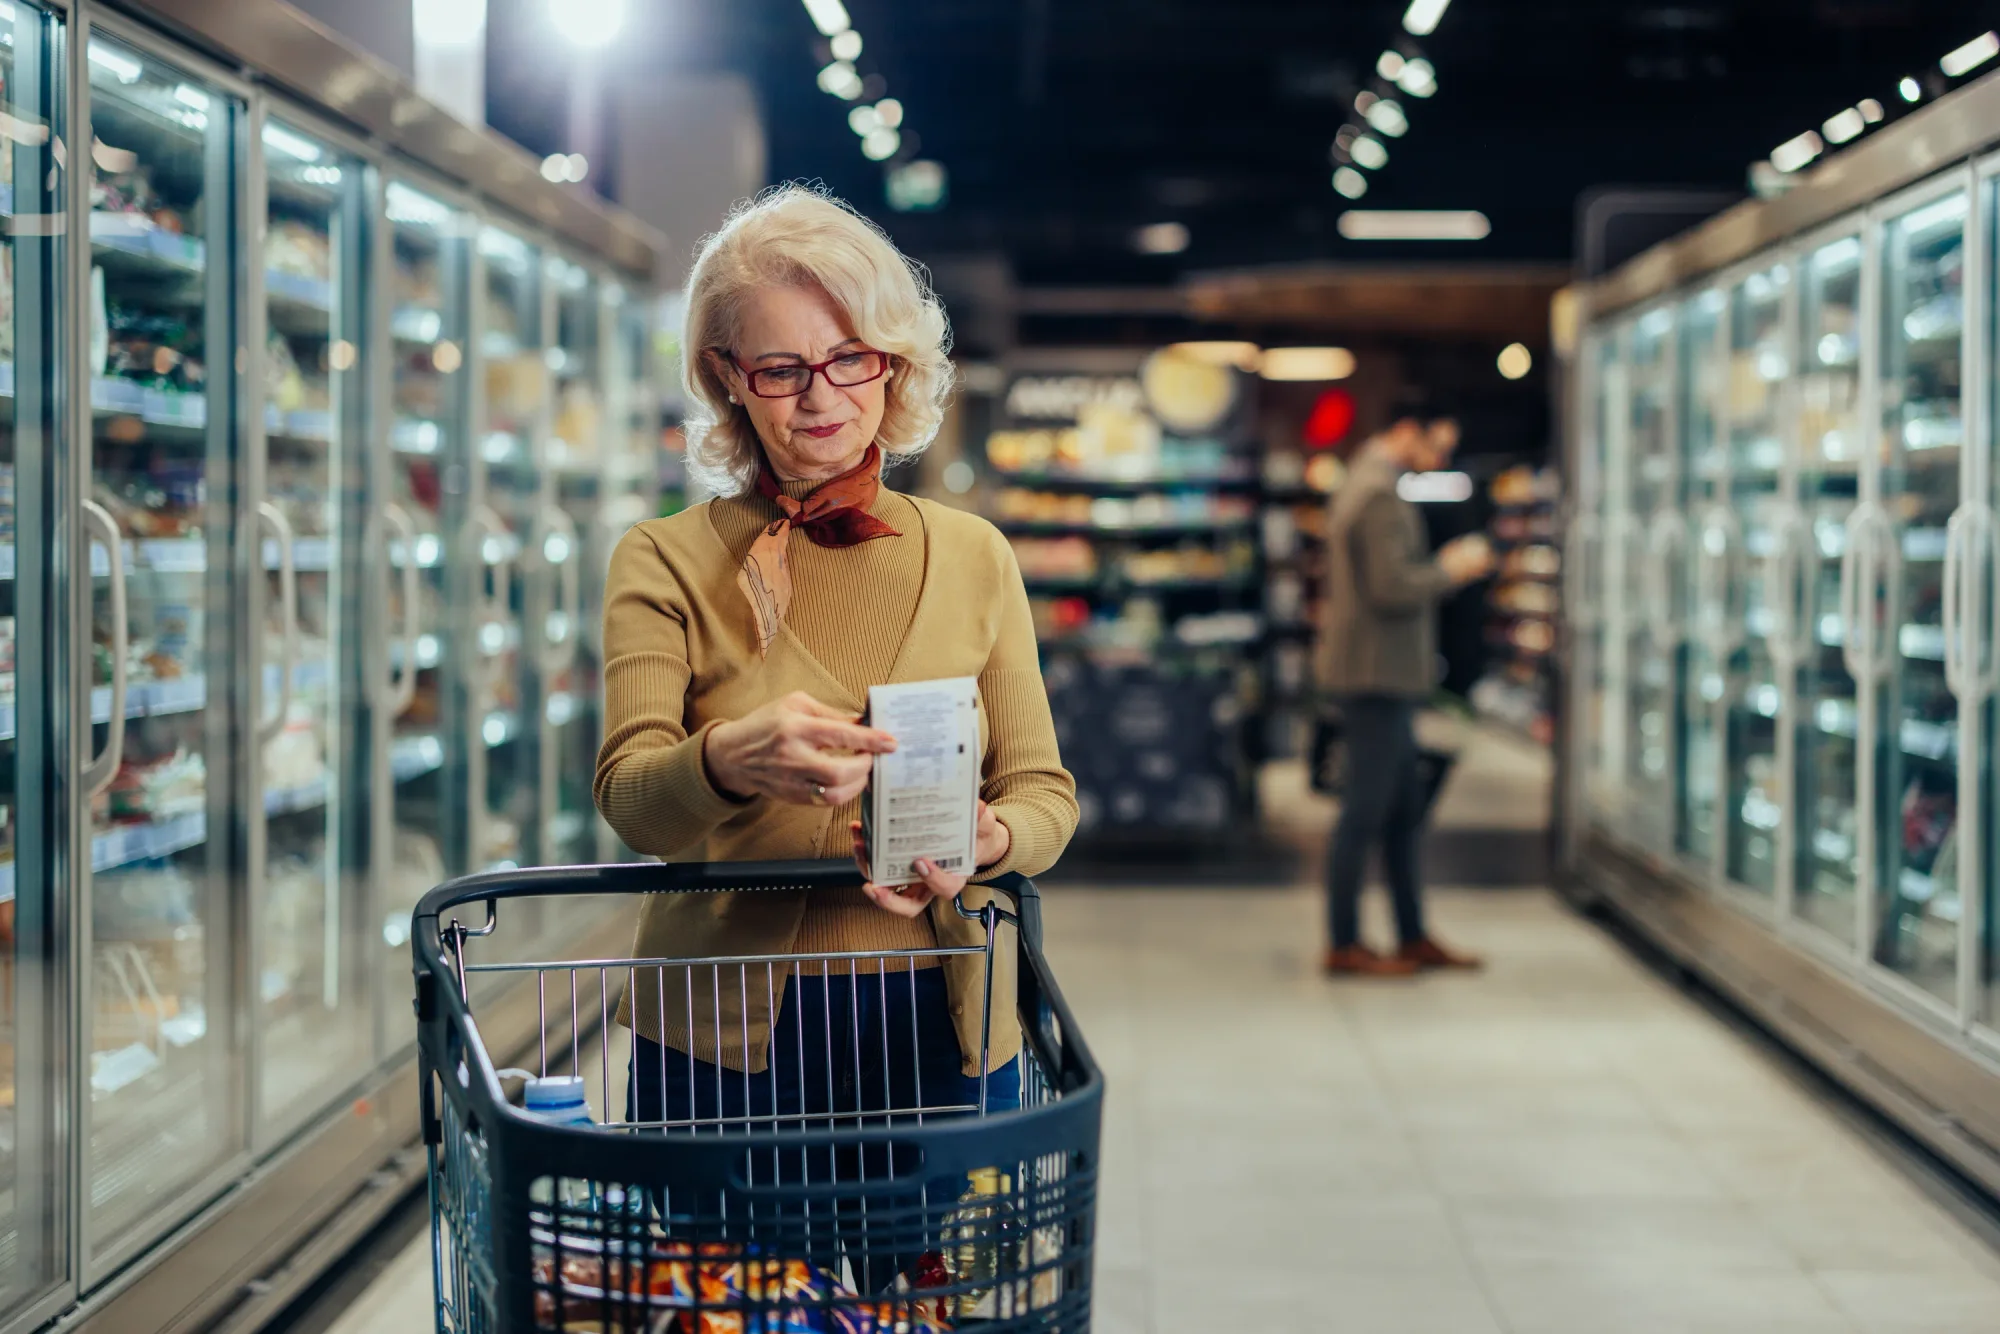 Senior woman shopping in a grocery store, standing beside shopping cart. She is reading the ingredient label on product.